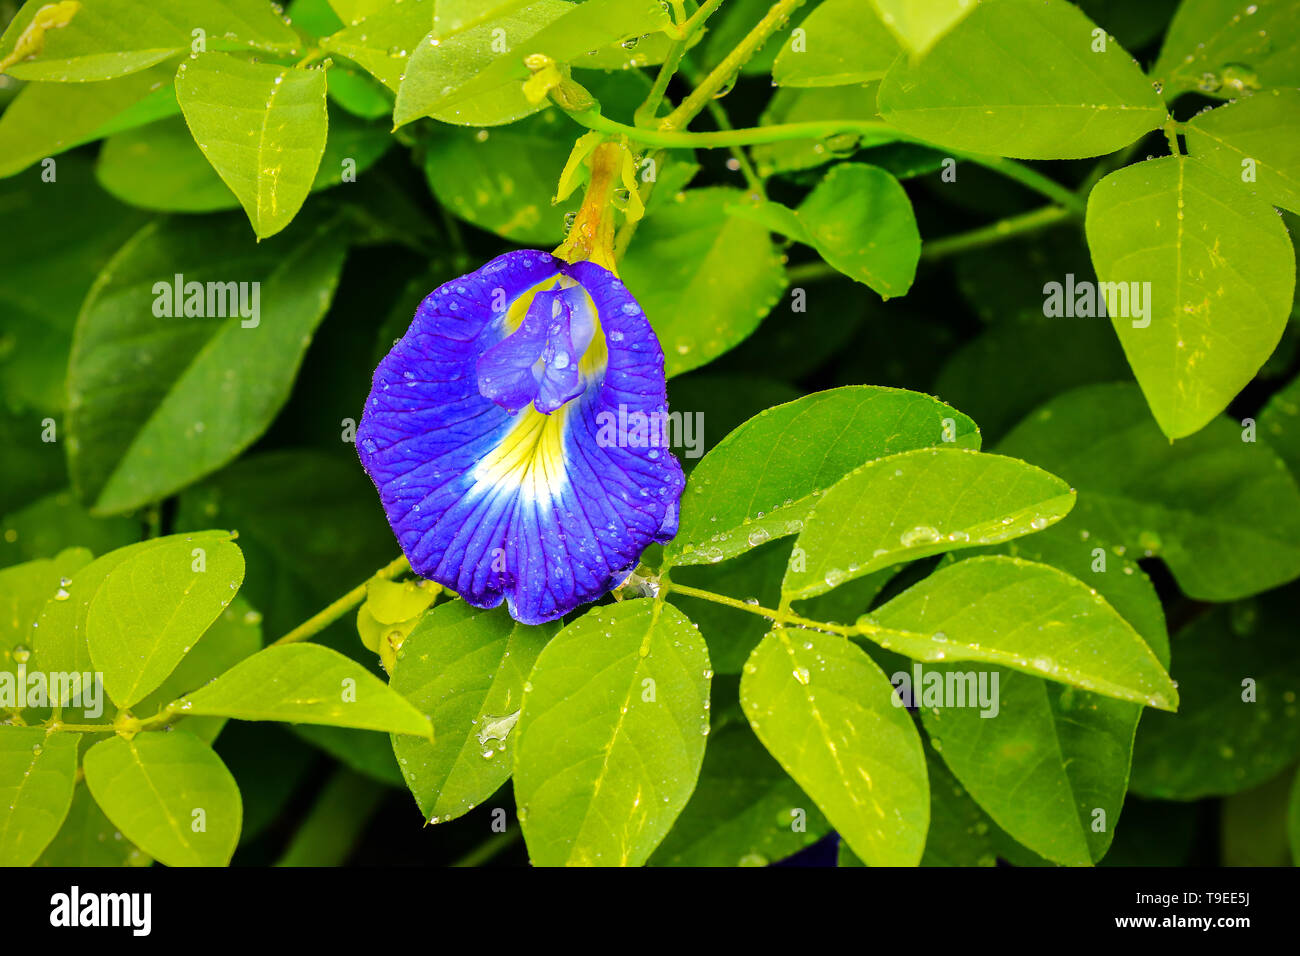 Clitoria ternatea or Asian pigeonwings is a plant species belonging to the Fabaceae family. Malaysia. Stock Photo